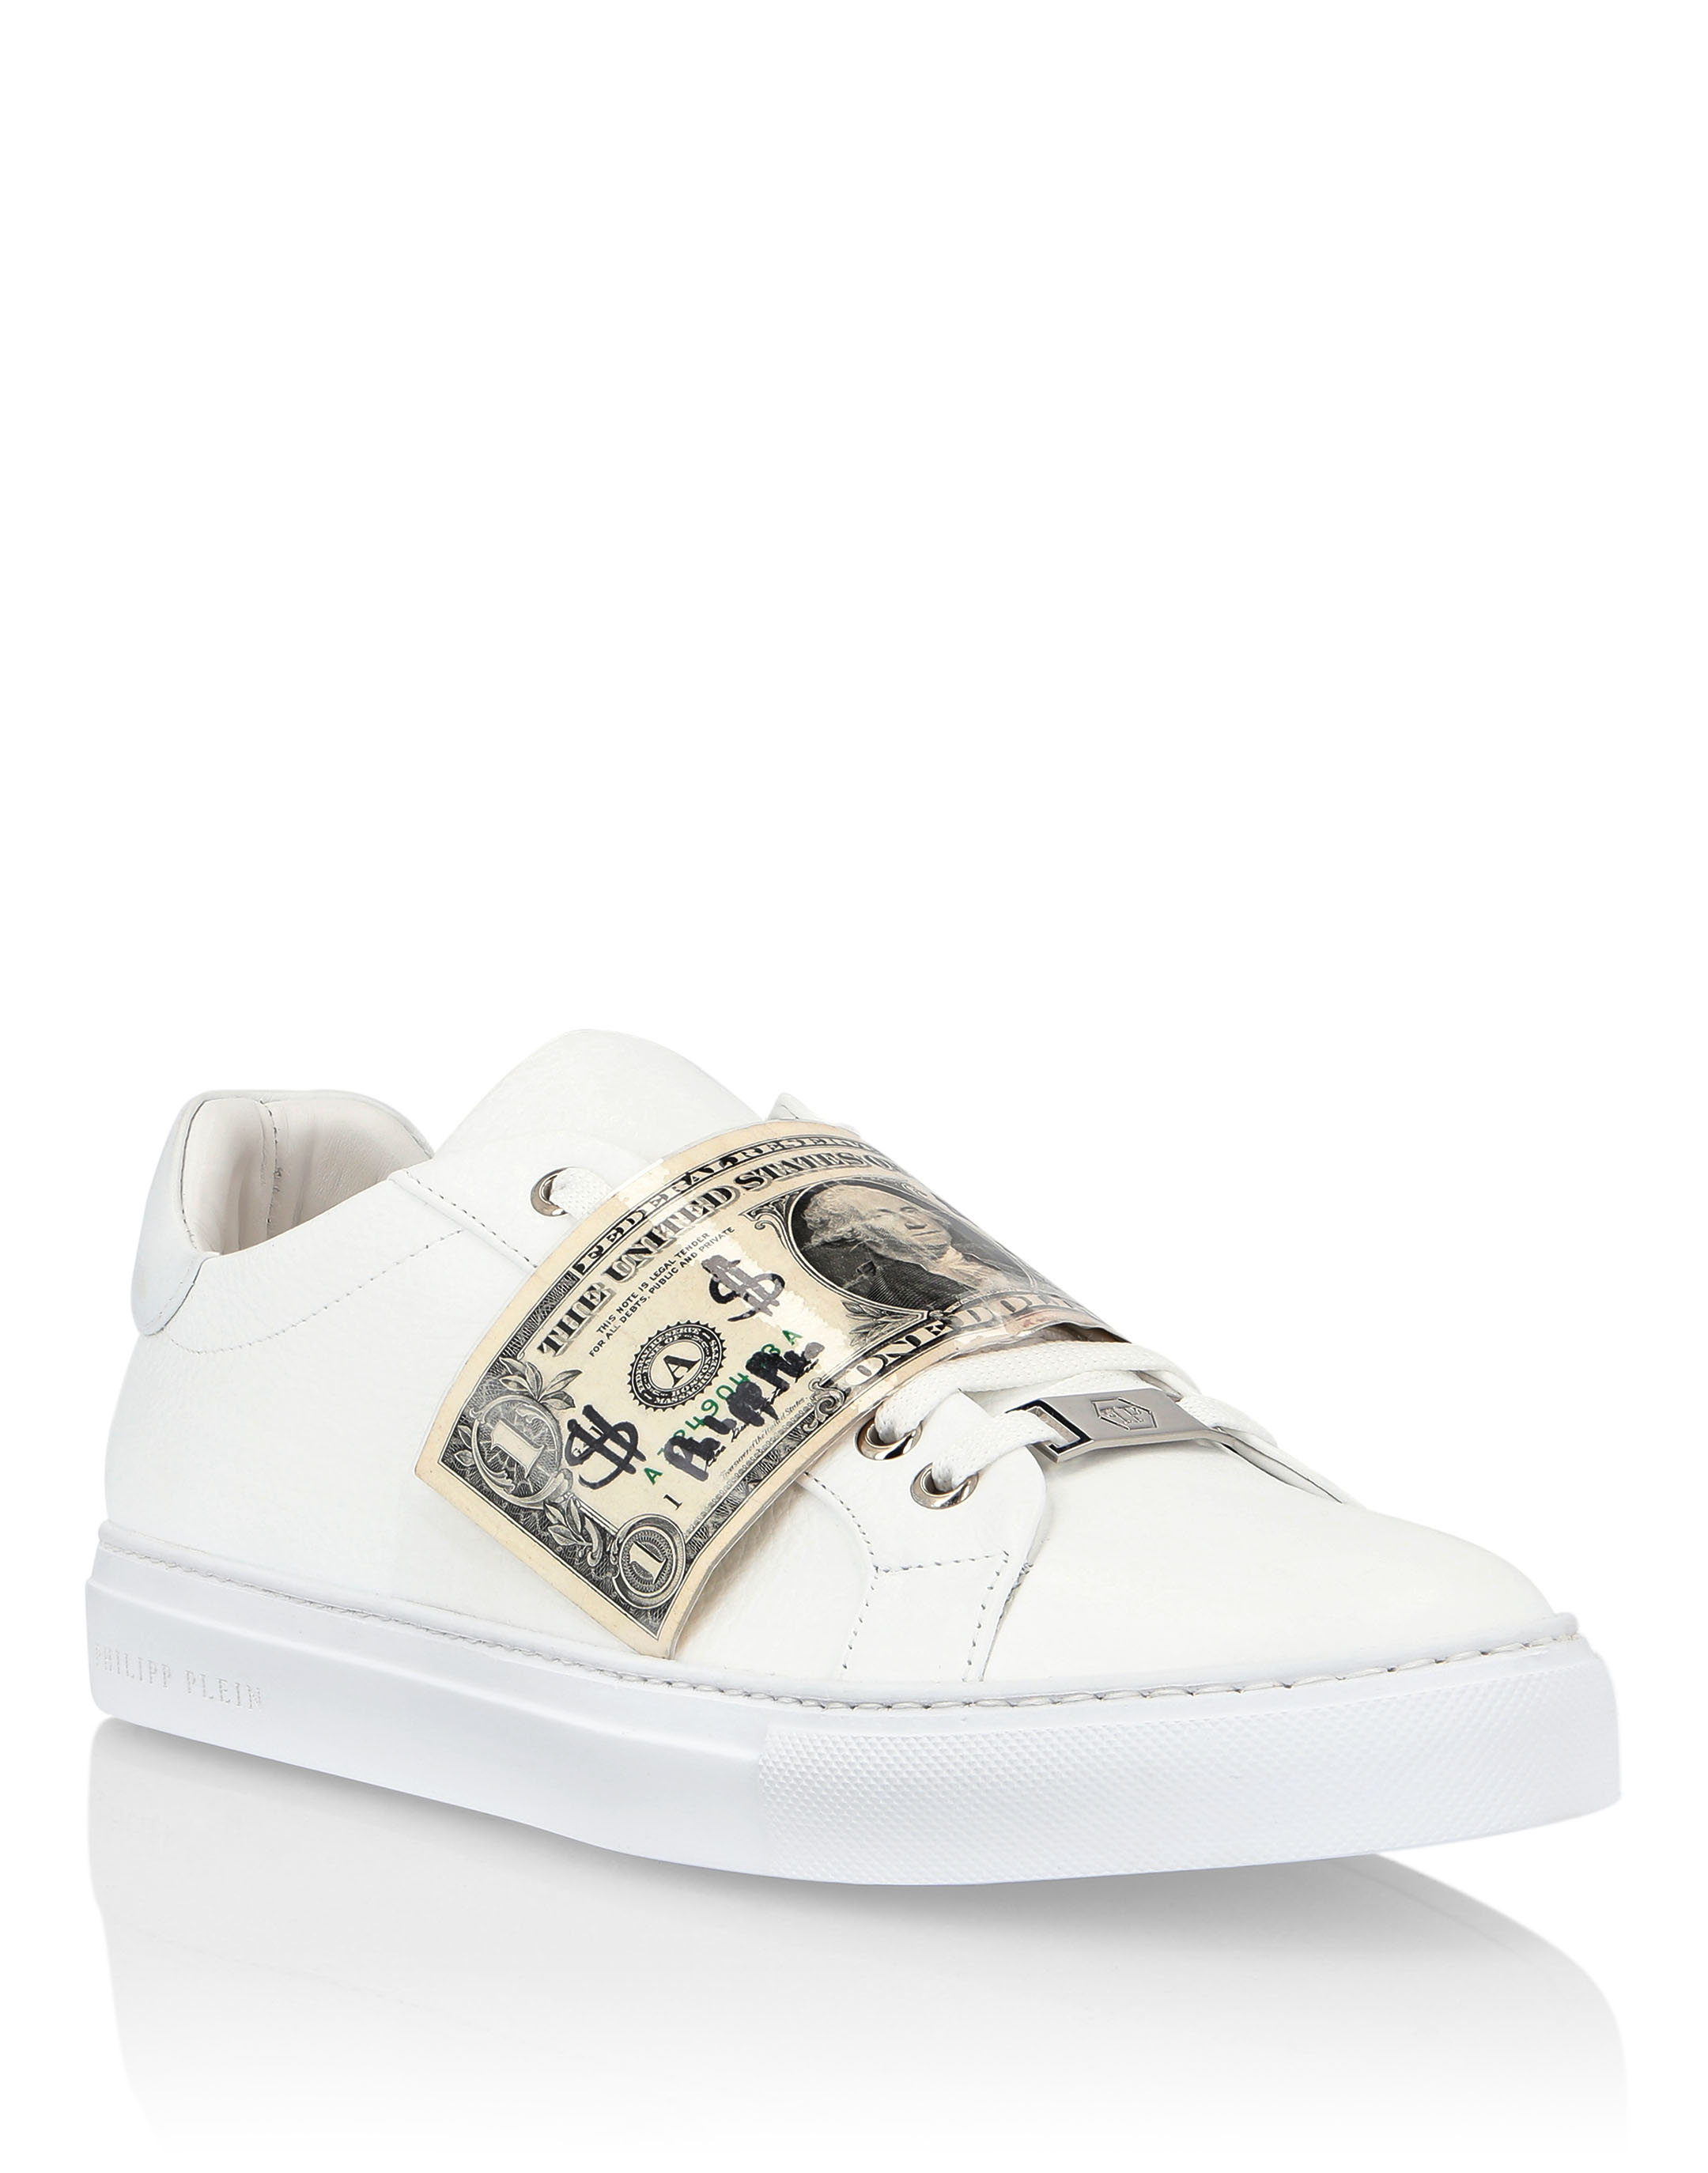 Lo-Top Sneakers Dollar | Philipp Plein Outlet